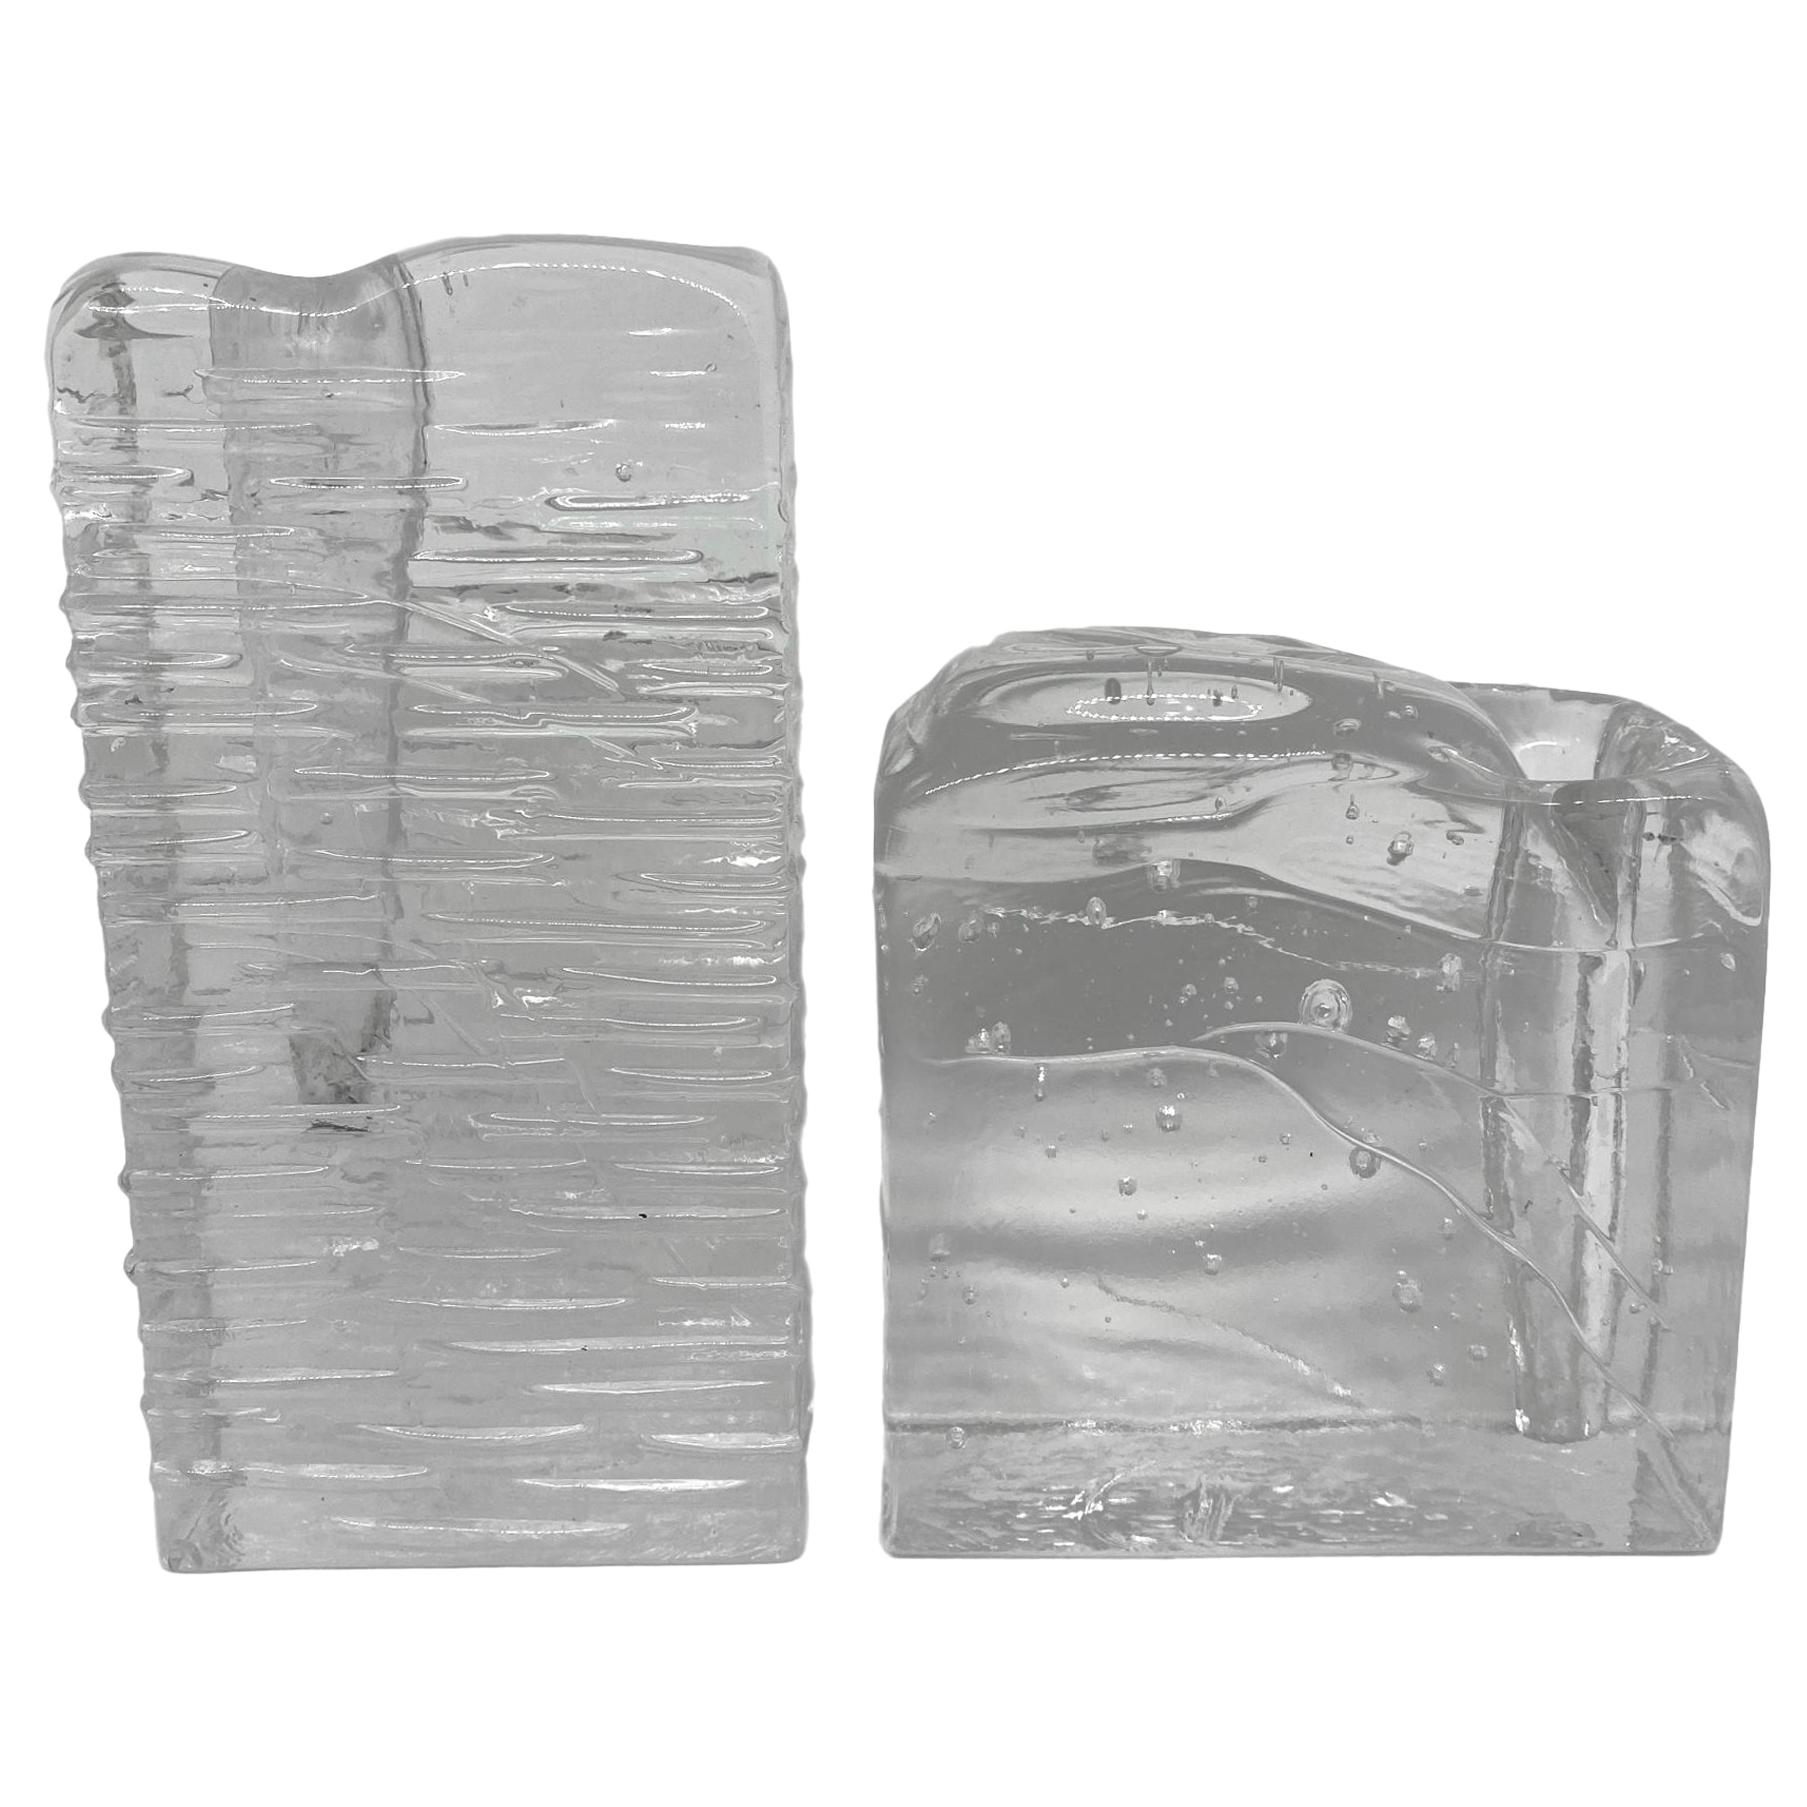 Collection of 2 Ice Block Glass "Solifleur" Vases, German, 1960s